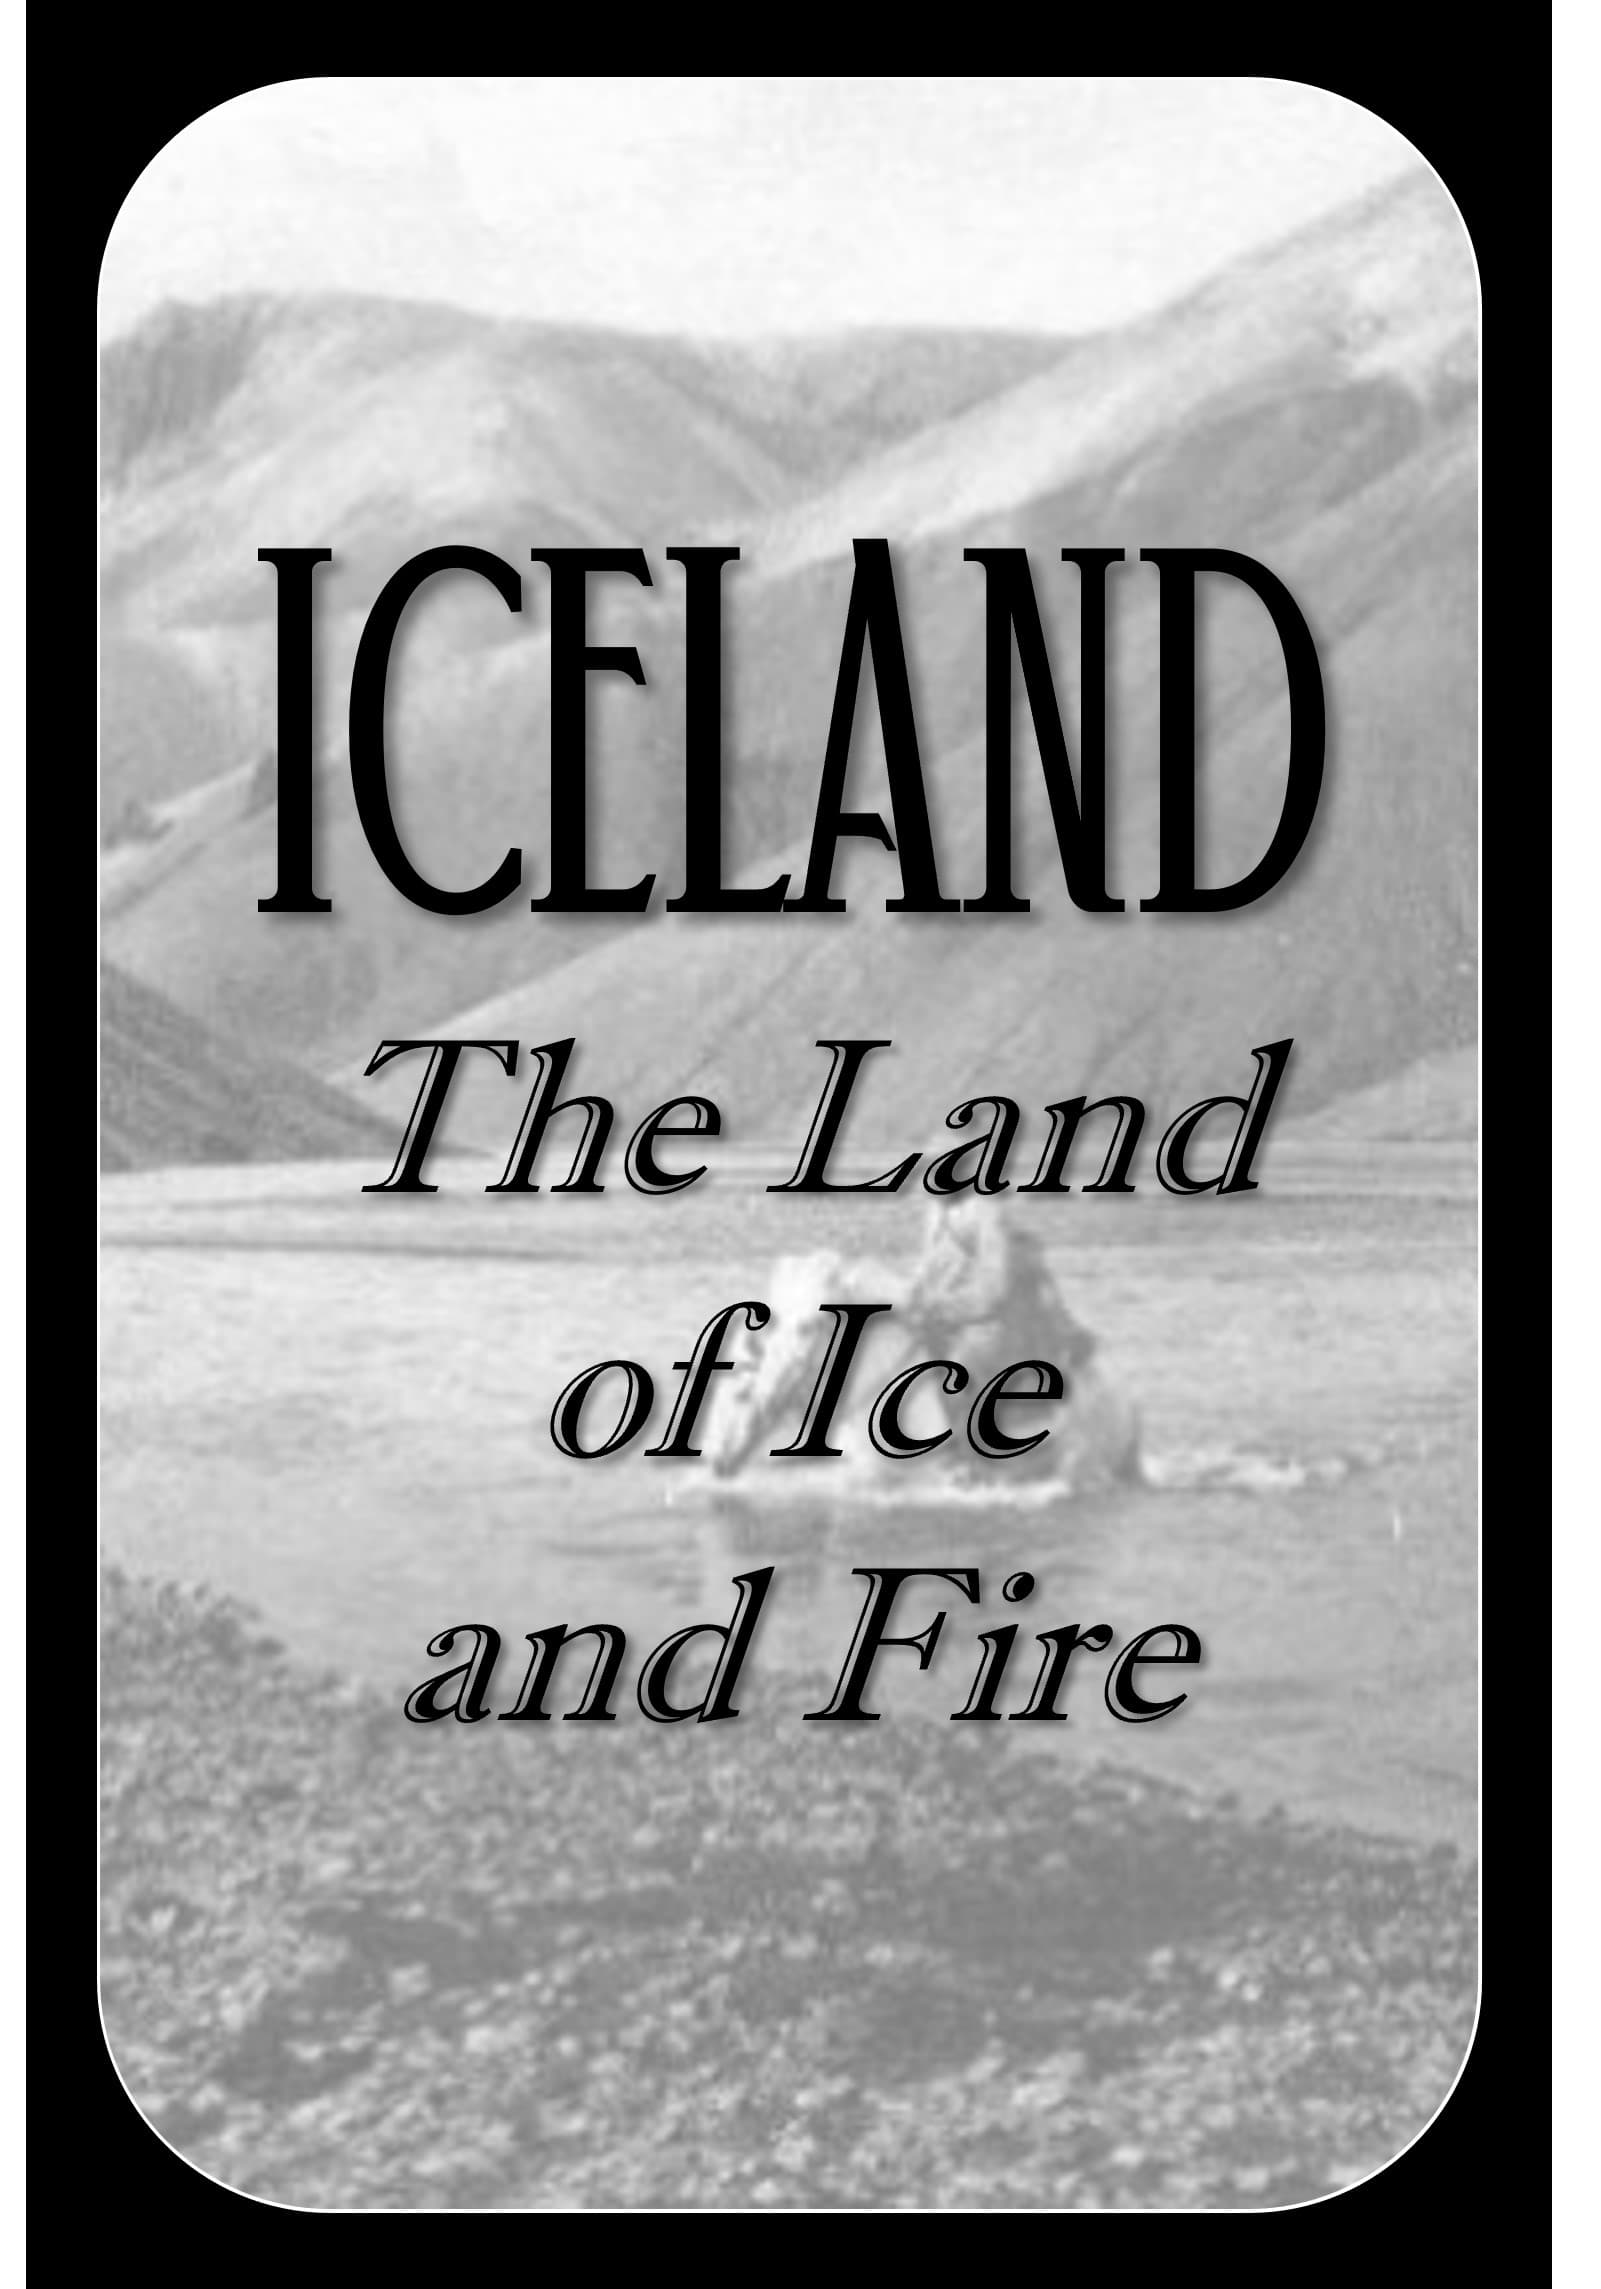 Iceland - The Land of Ice and Fire